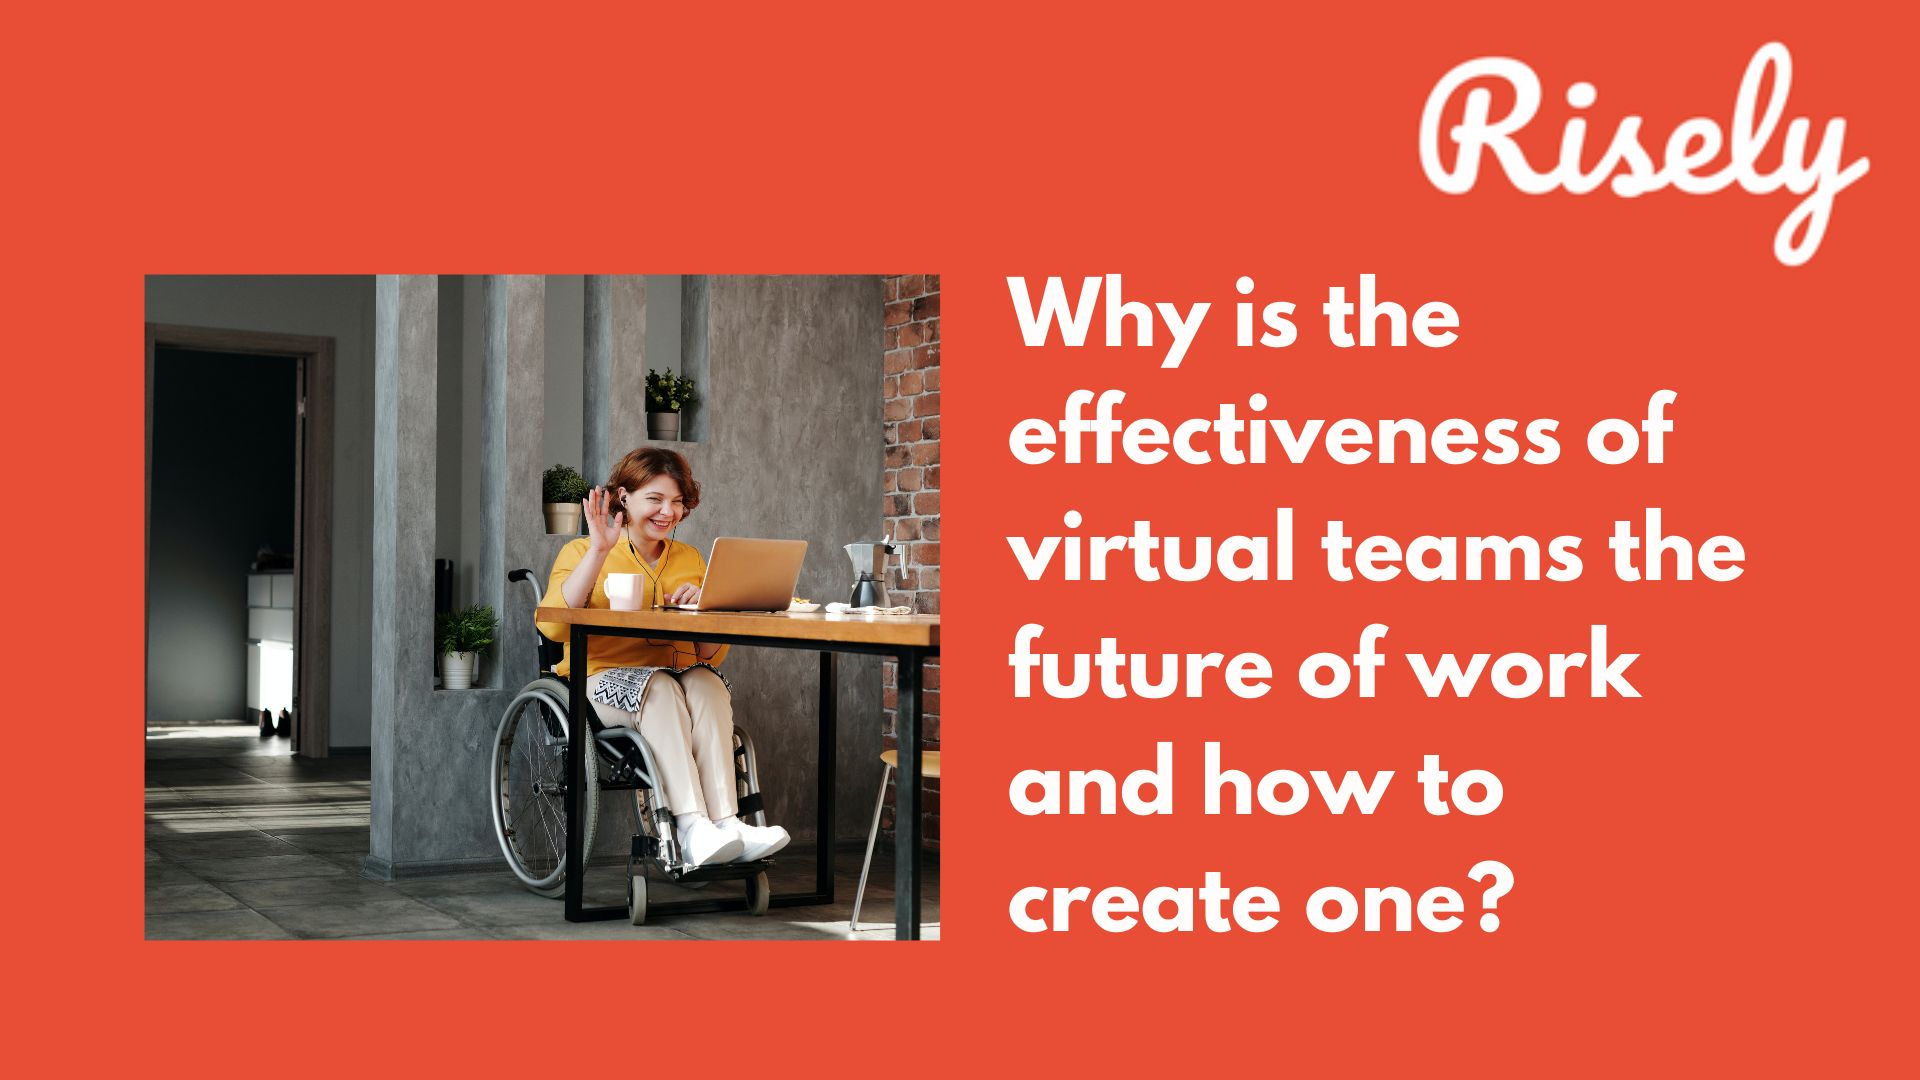 Why is the effectiveness of virtual teams the future of work and how to create one?